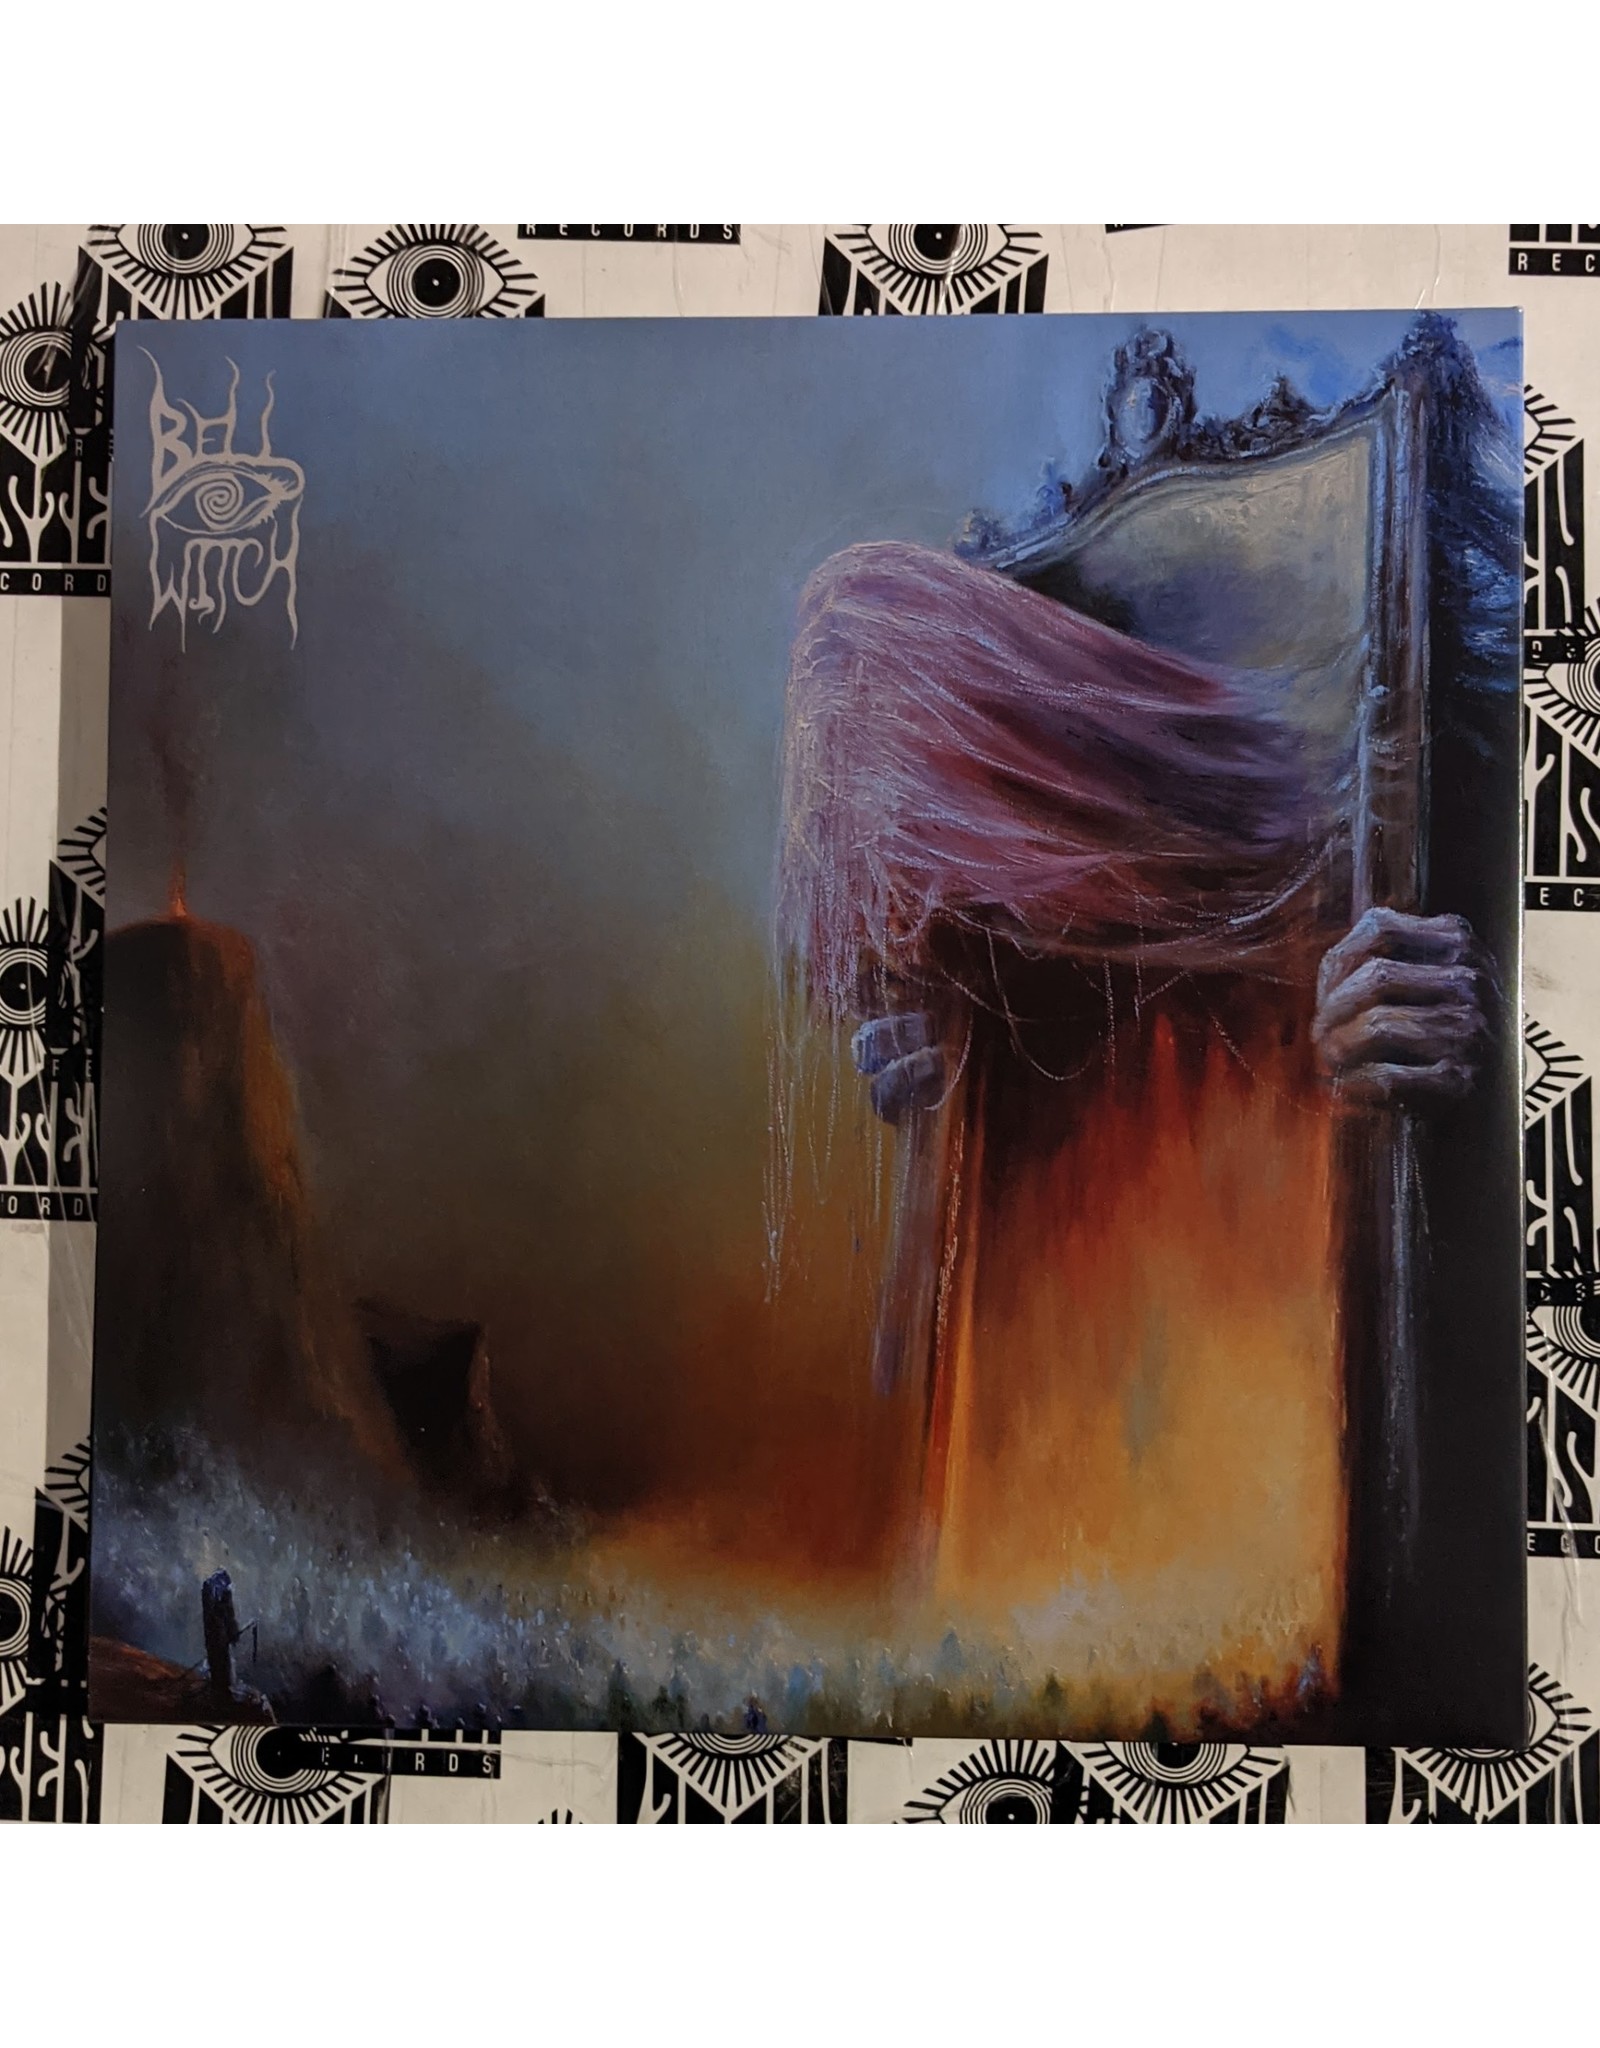 USED: Bell Witch: Mirror Reaper - Listen Records